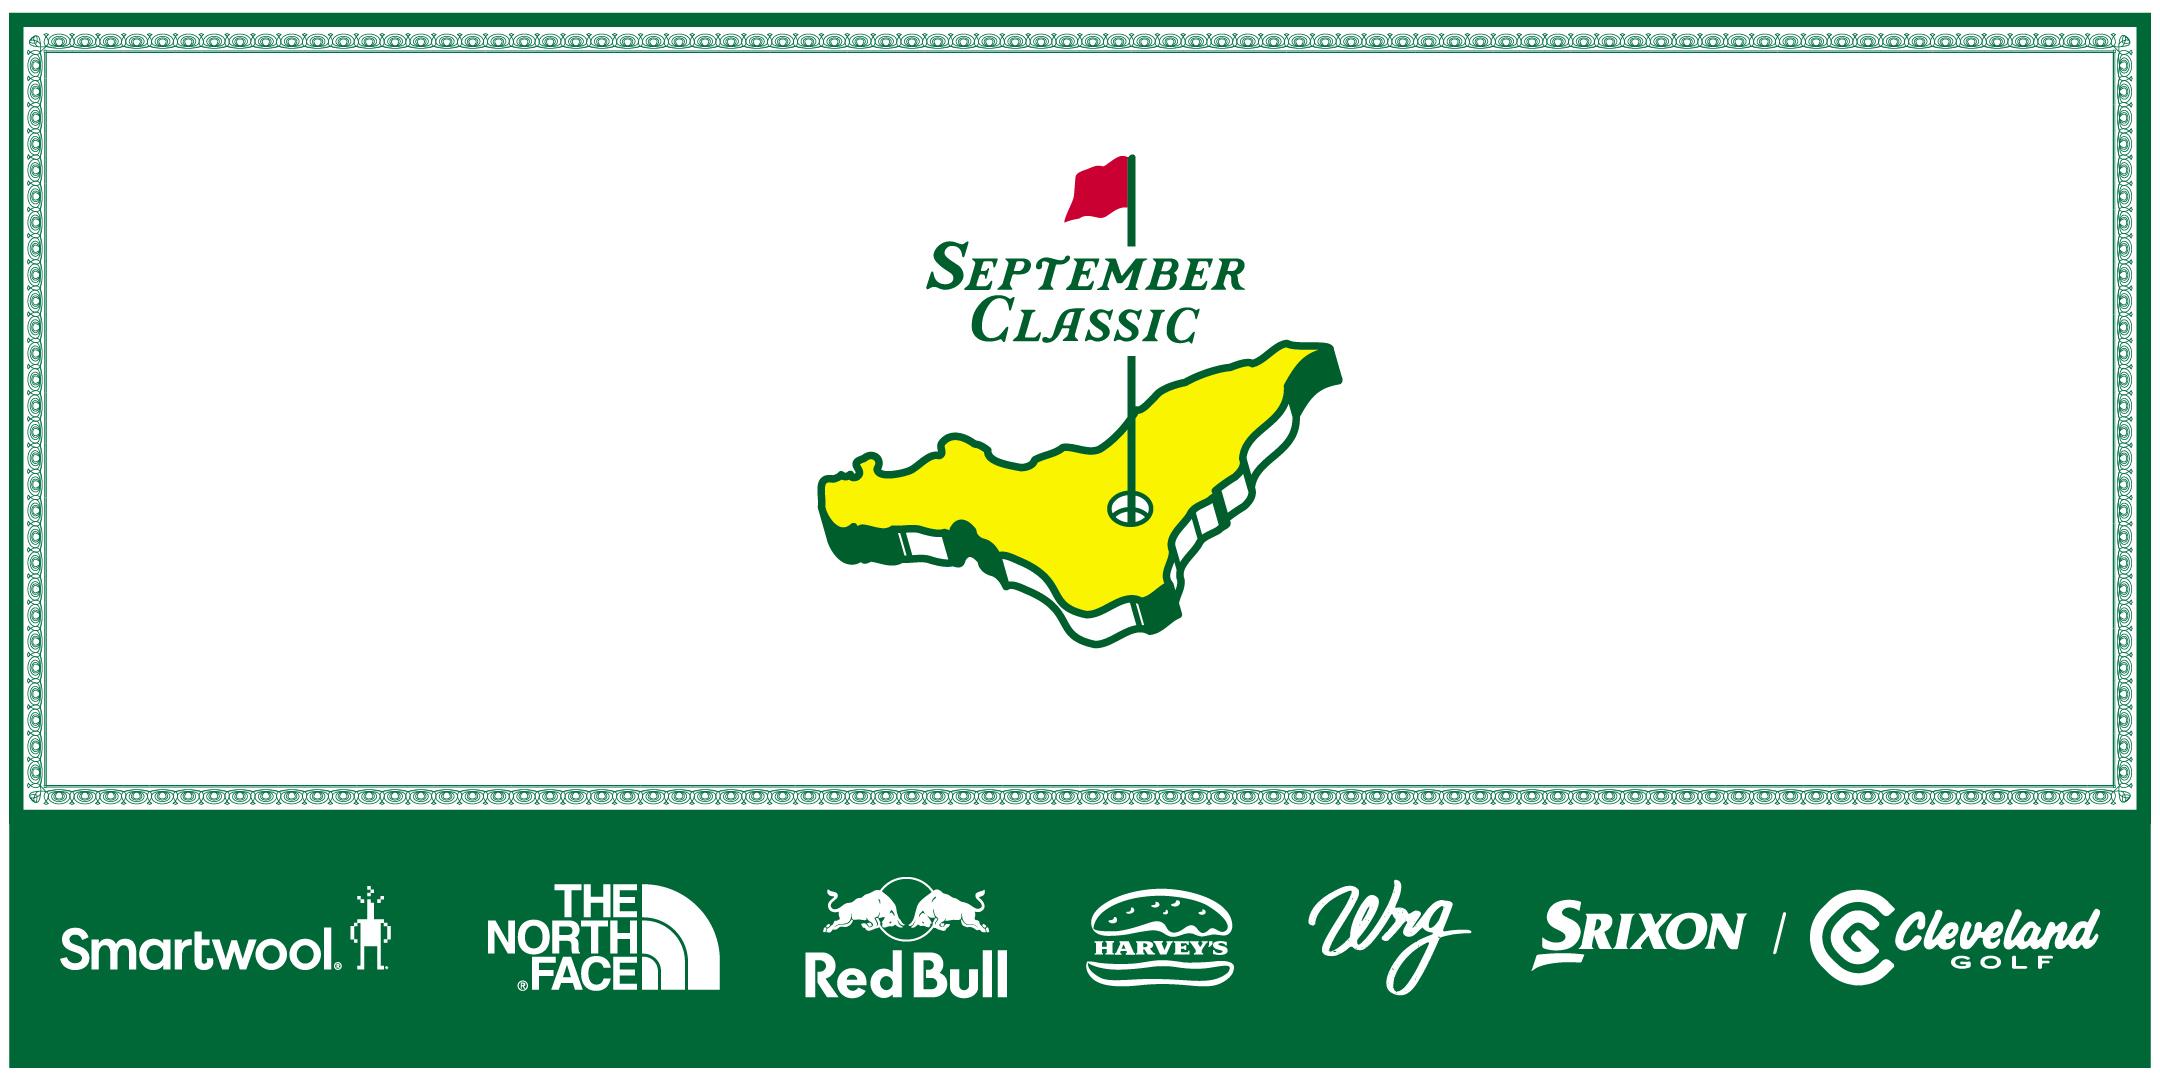 2nd Annual September Classic Charity Golf Tournament